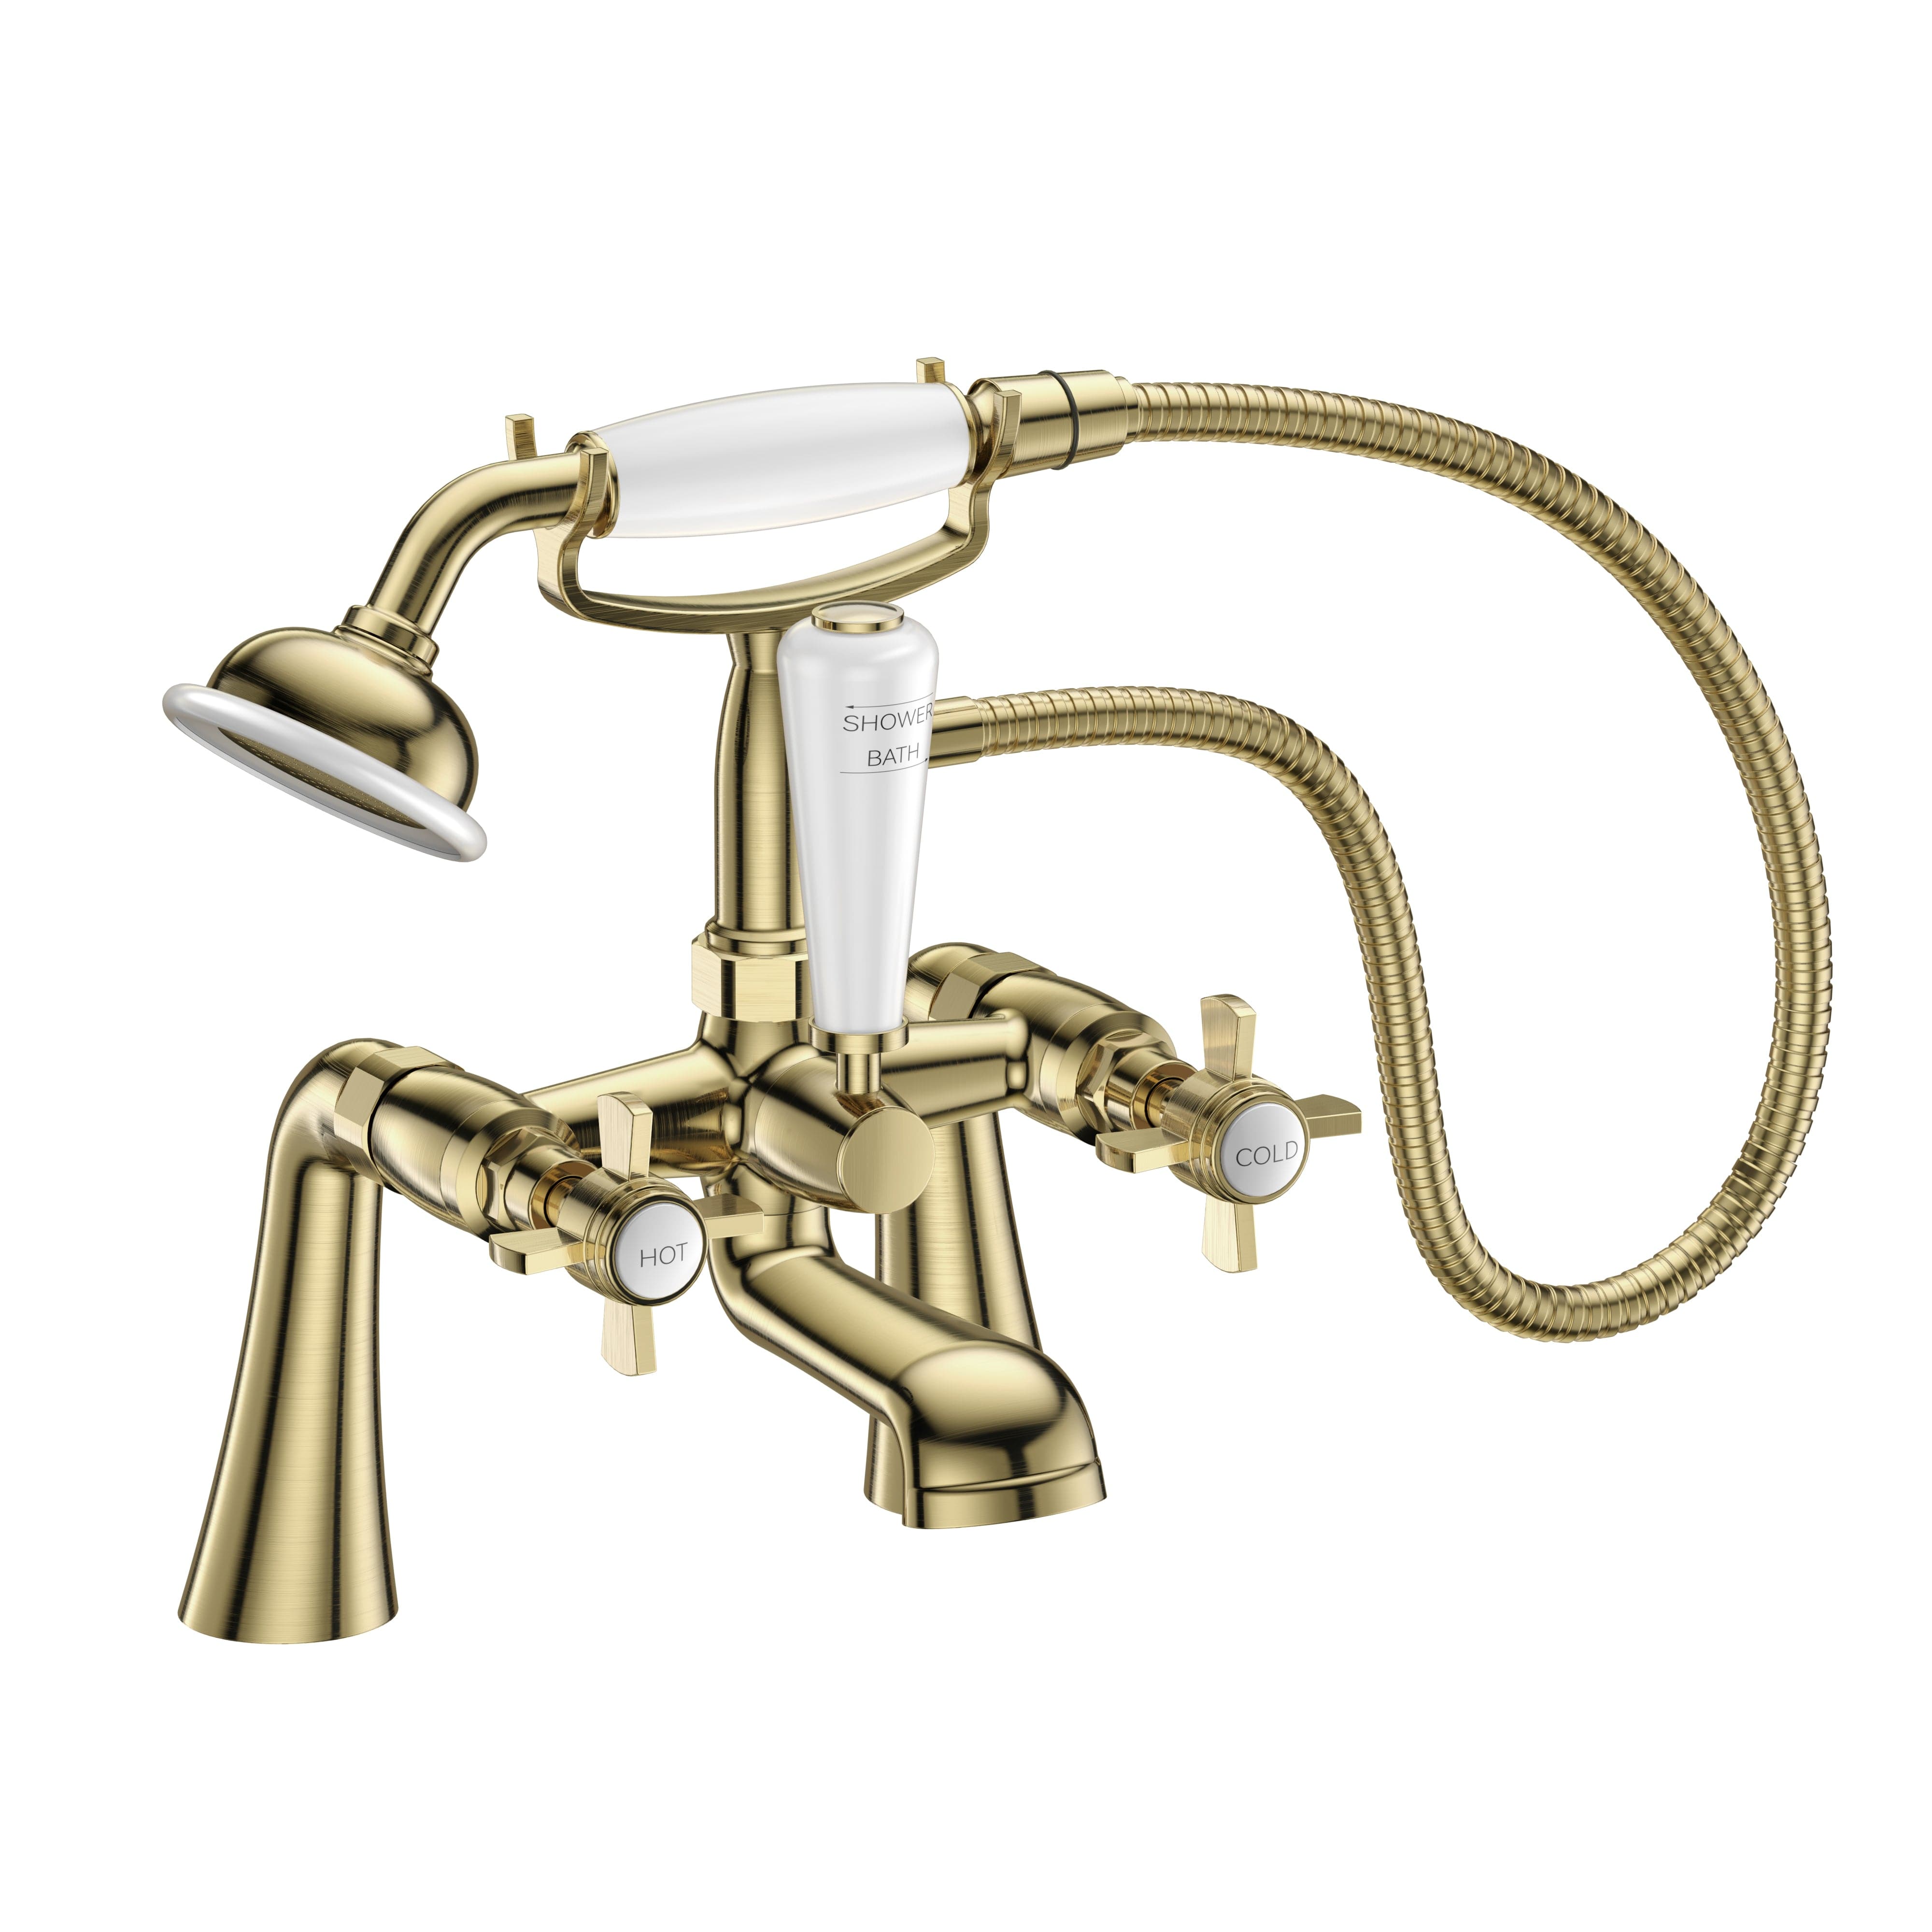 Regency Traditional Bath Shower Mixer Tap with Kit in Brushed Brass, elegant design for UK bathrooms. Buy now at Bathroom4Less.